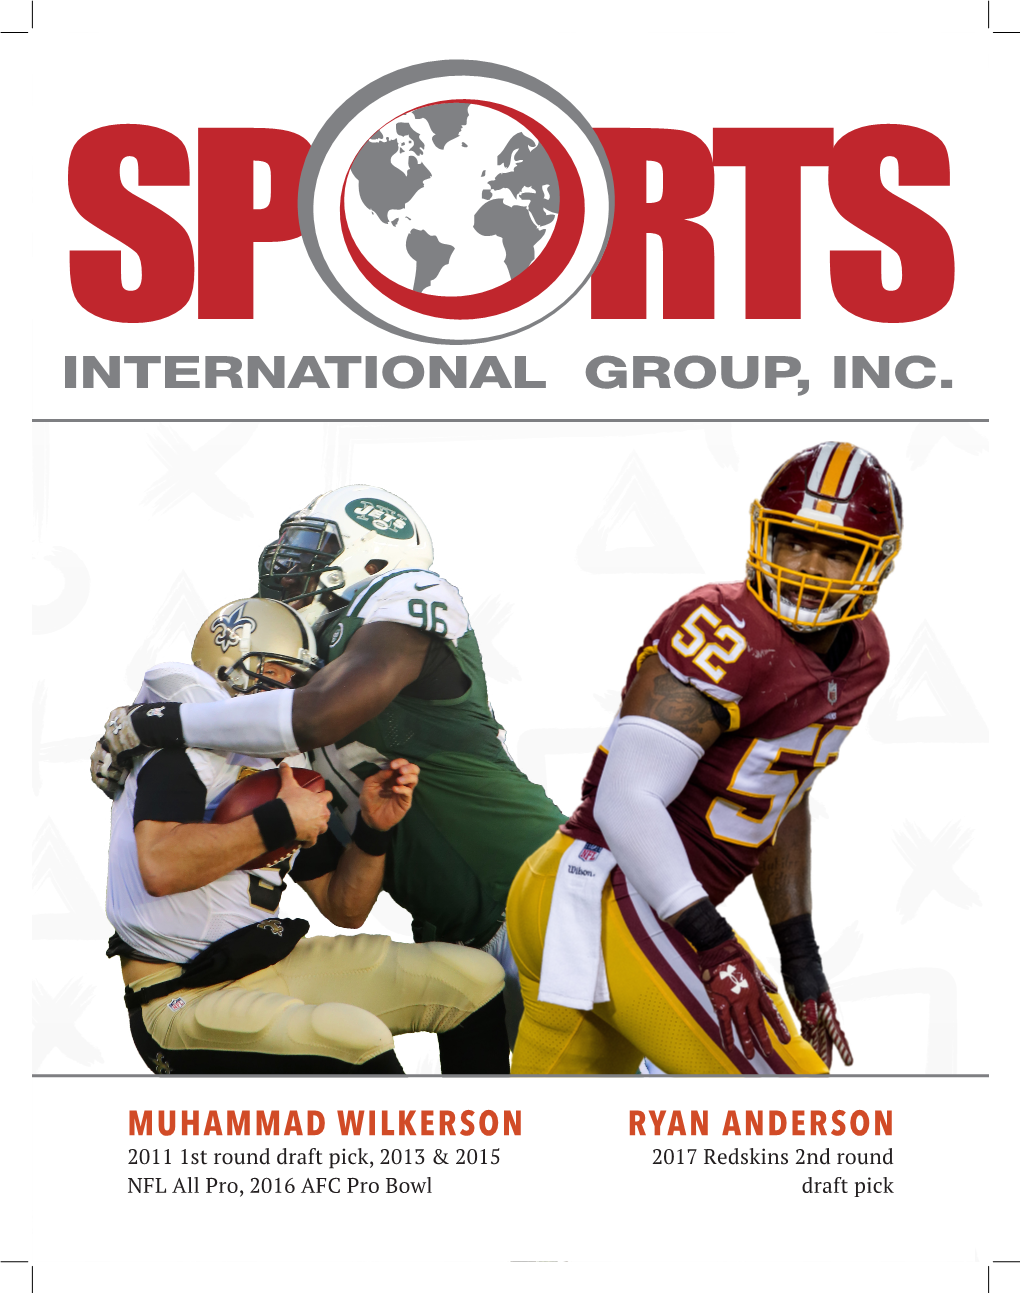 MUHAMMAD WILKERSON RYAN ANDERSON 2011 1St Round Draft Pick, 2013 & 2015 2017 Redskins 2Nd Round NFL All Pro, 2016 AFC Pro Bowl Draft Pick PLAYERS ABOUT SIG